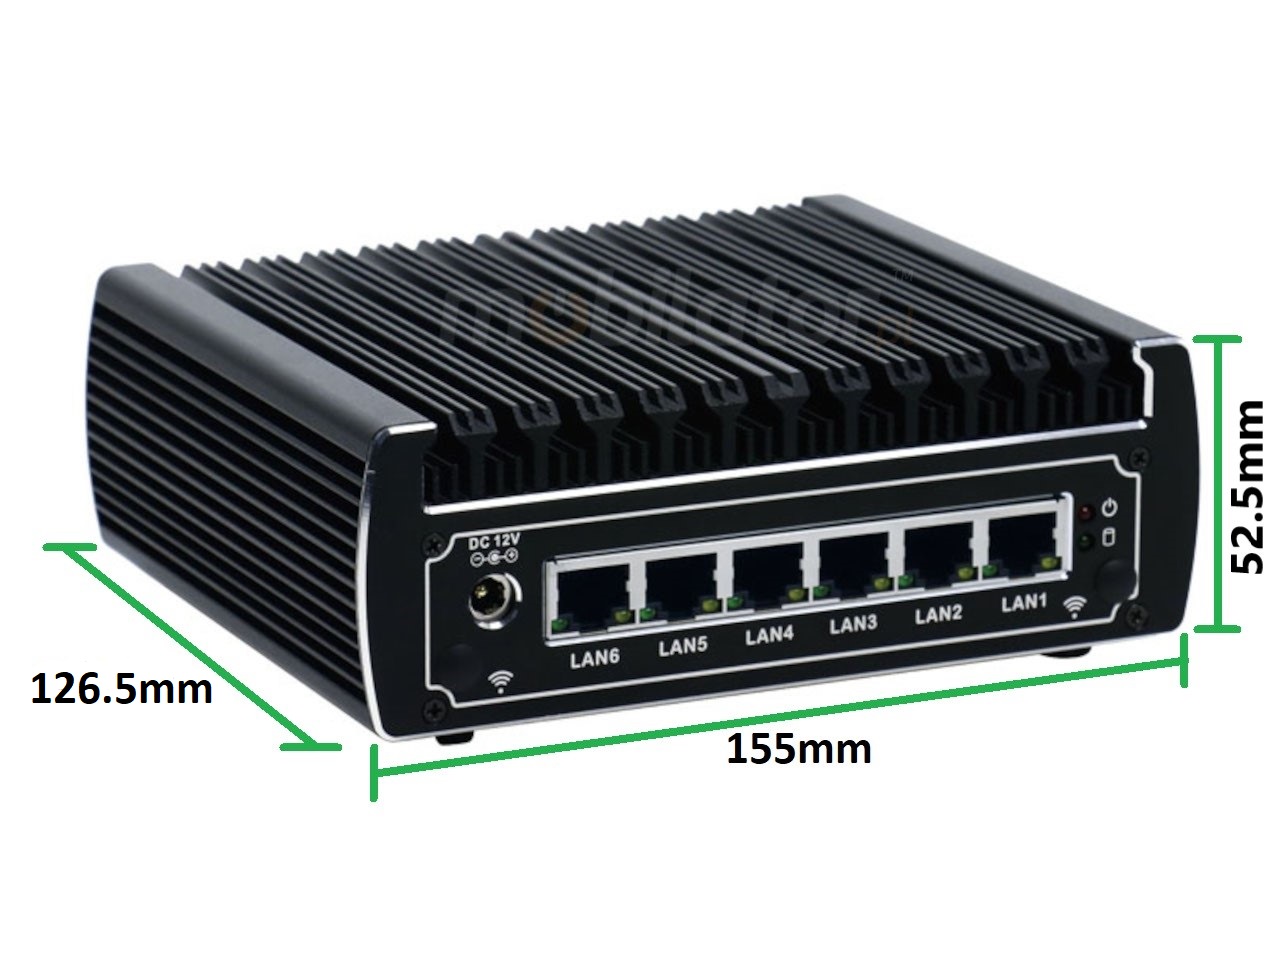  IBOX N133 v.16, size, industrial small fast reliable fanless industrial small LAN INTEL i3 HDD DDR4 WIFI BLUETOOTH